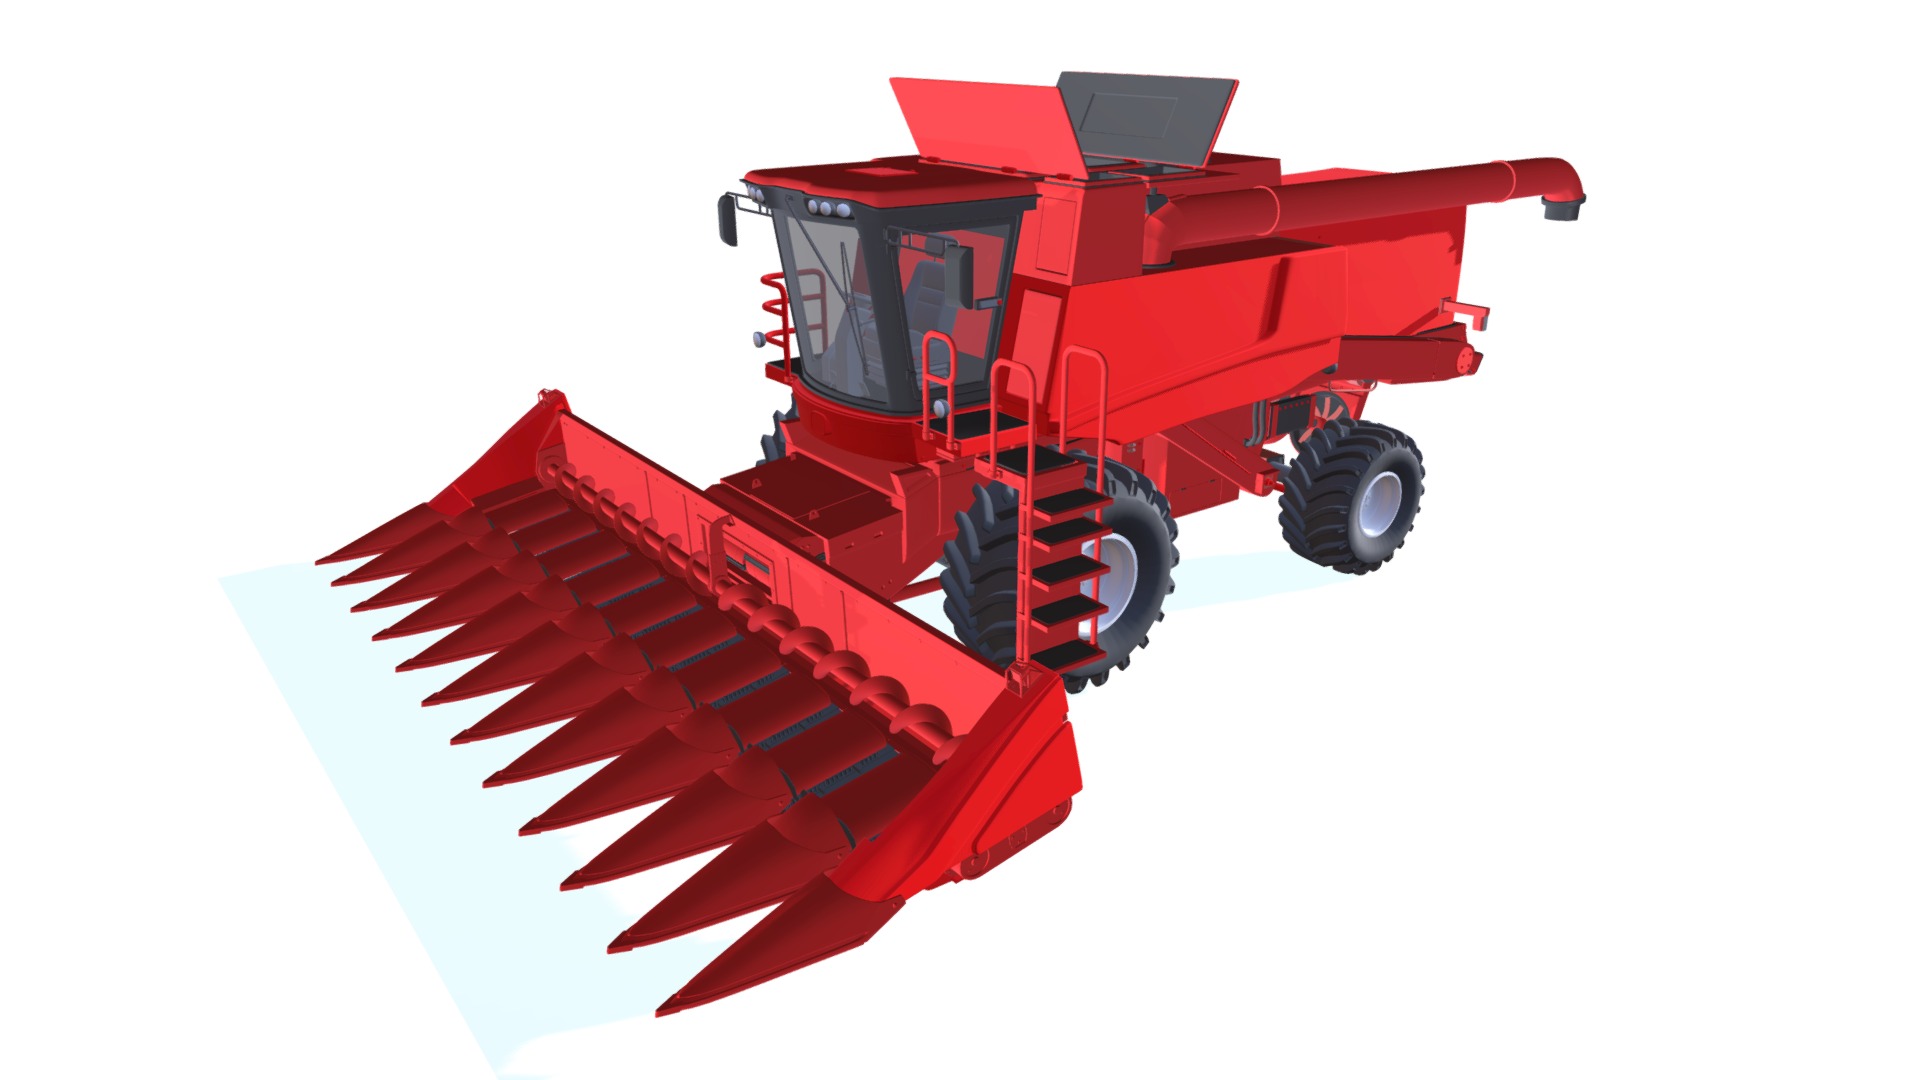 3D model Combine Harvester - This is a 3D model of the Combine Harvester. The 3D model is about a red and black tractor.